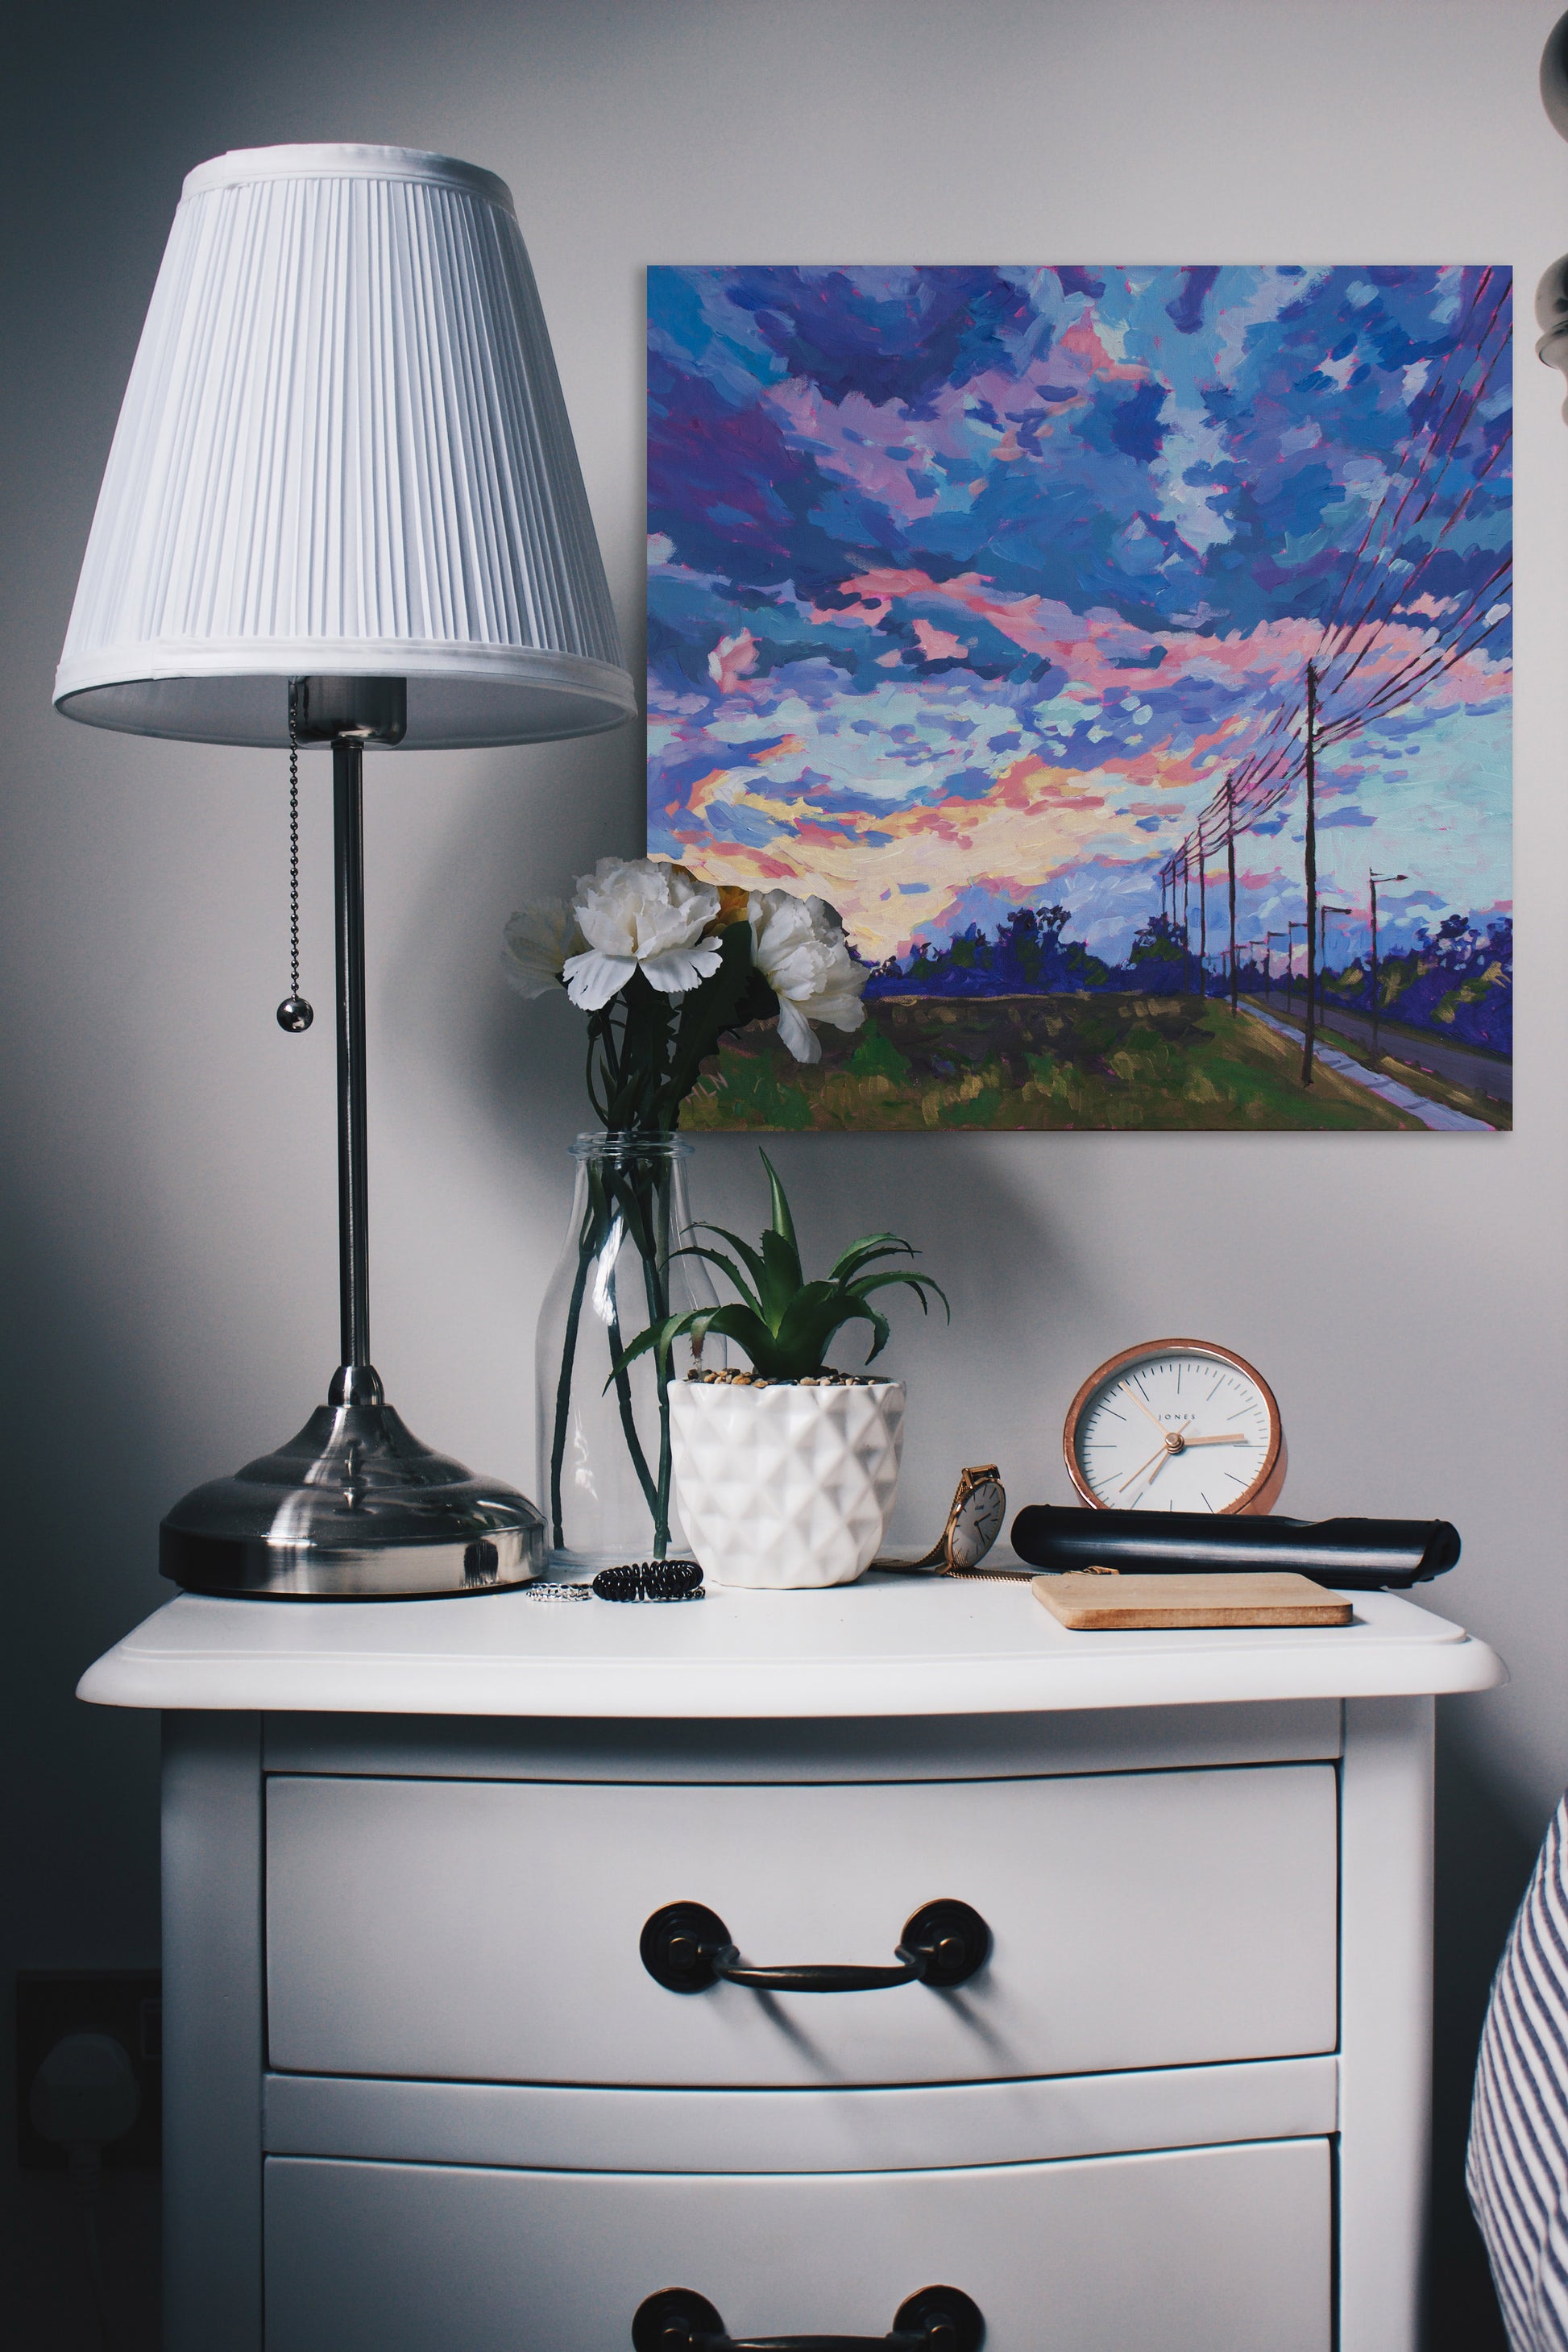 sunset painting by bedside table and lamp